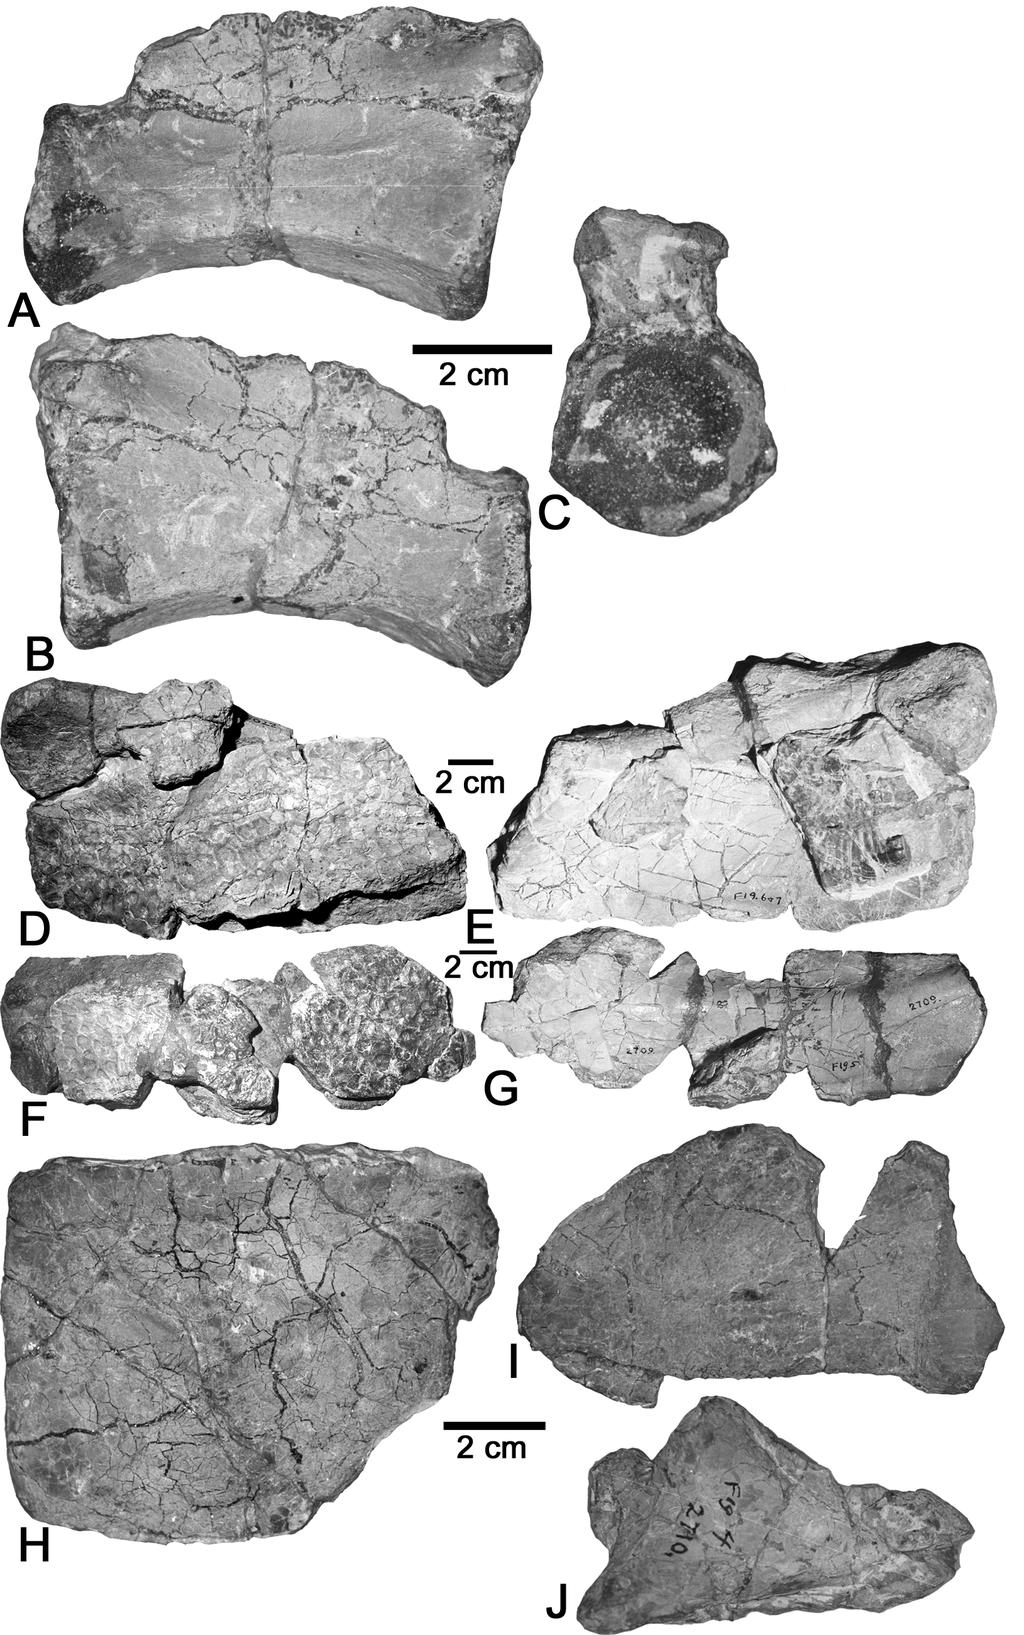 243 FIGURE 2. Topotypes of Typothorax coccinarum. A-C, H-I, AMNH 2713. D-G, AMNH 2709. J, AMNH 2710. A-C, complete caudal? centrum in A, right lateral, B, left lateral and C, anterior views.